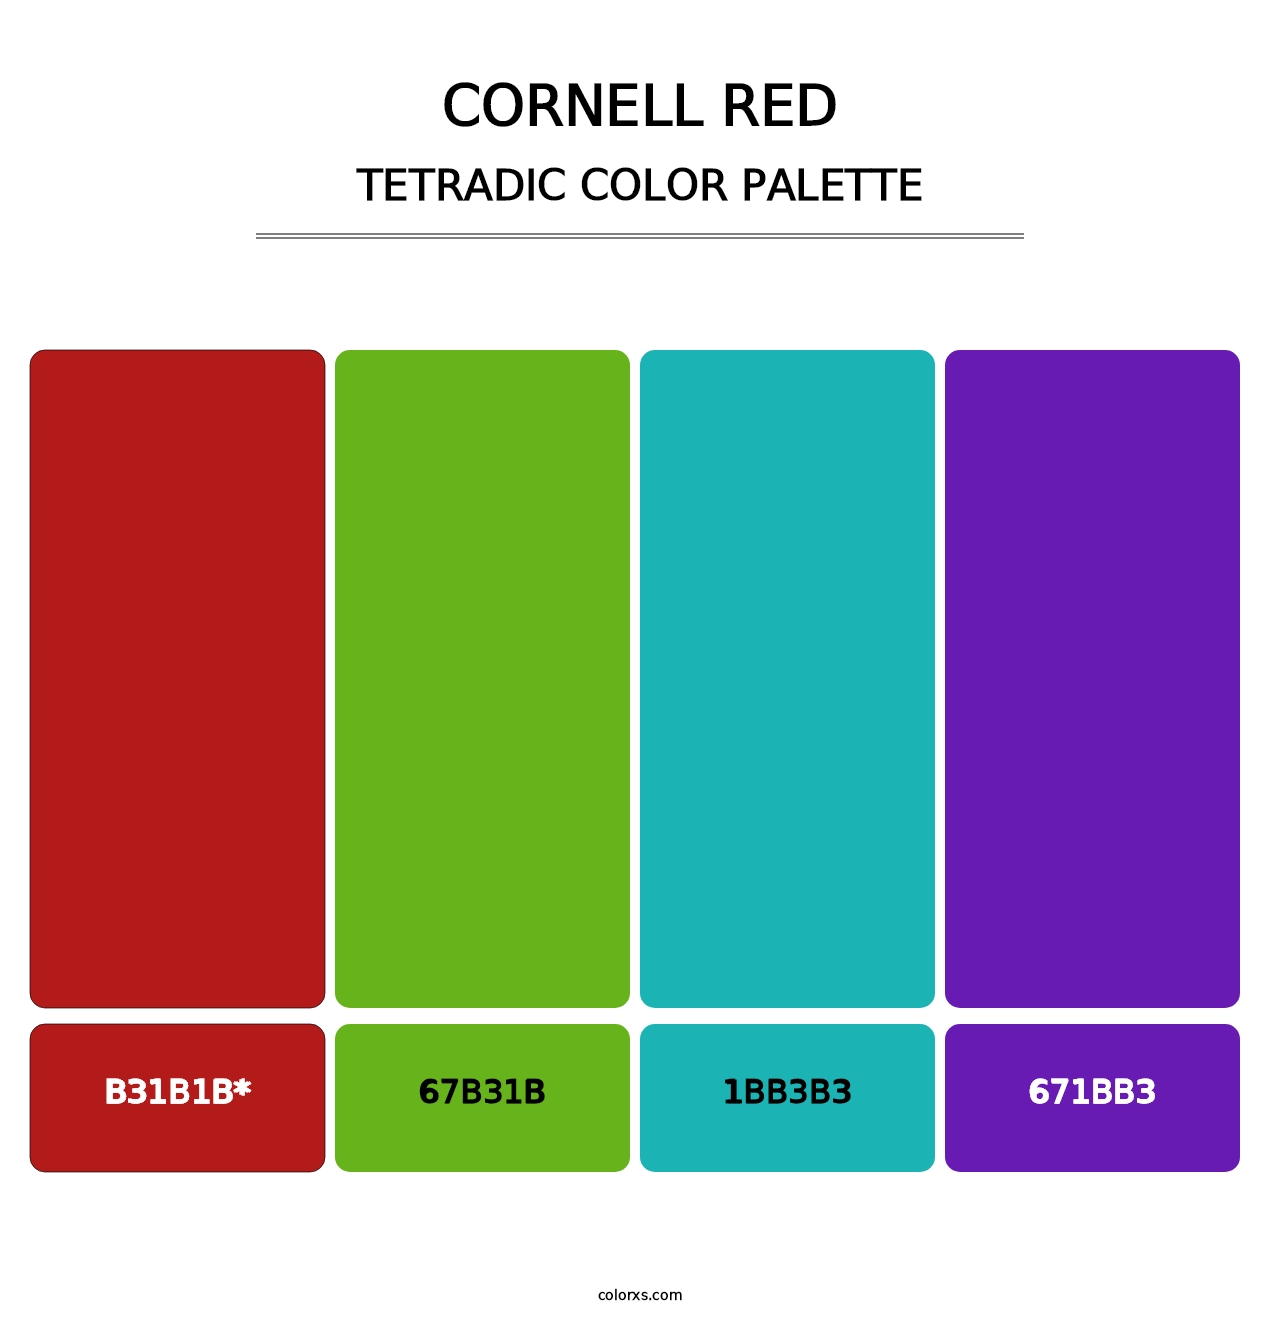 Cornell Red - Tetradic Color Palette